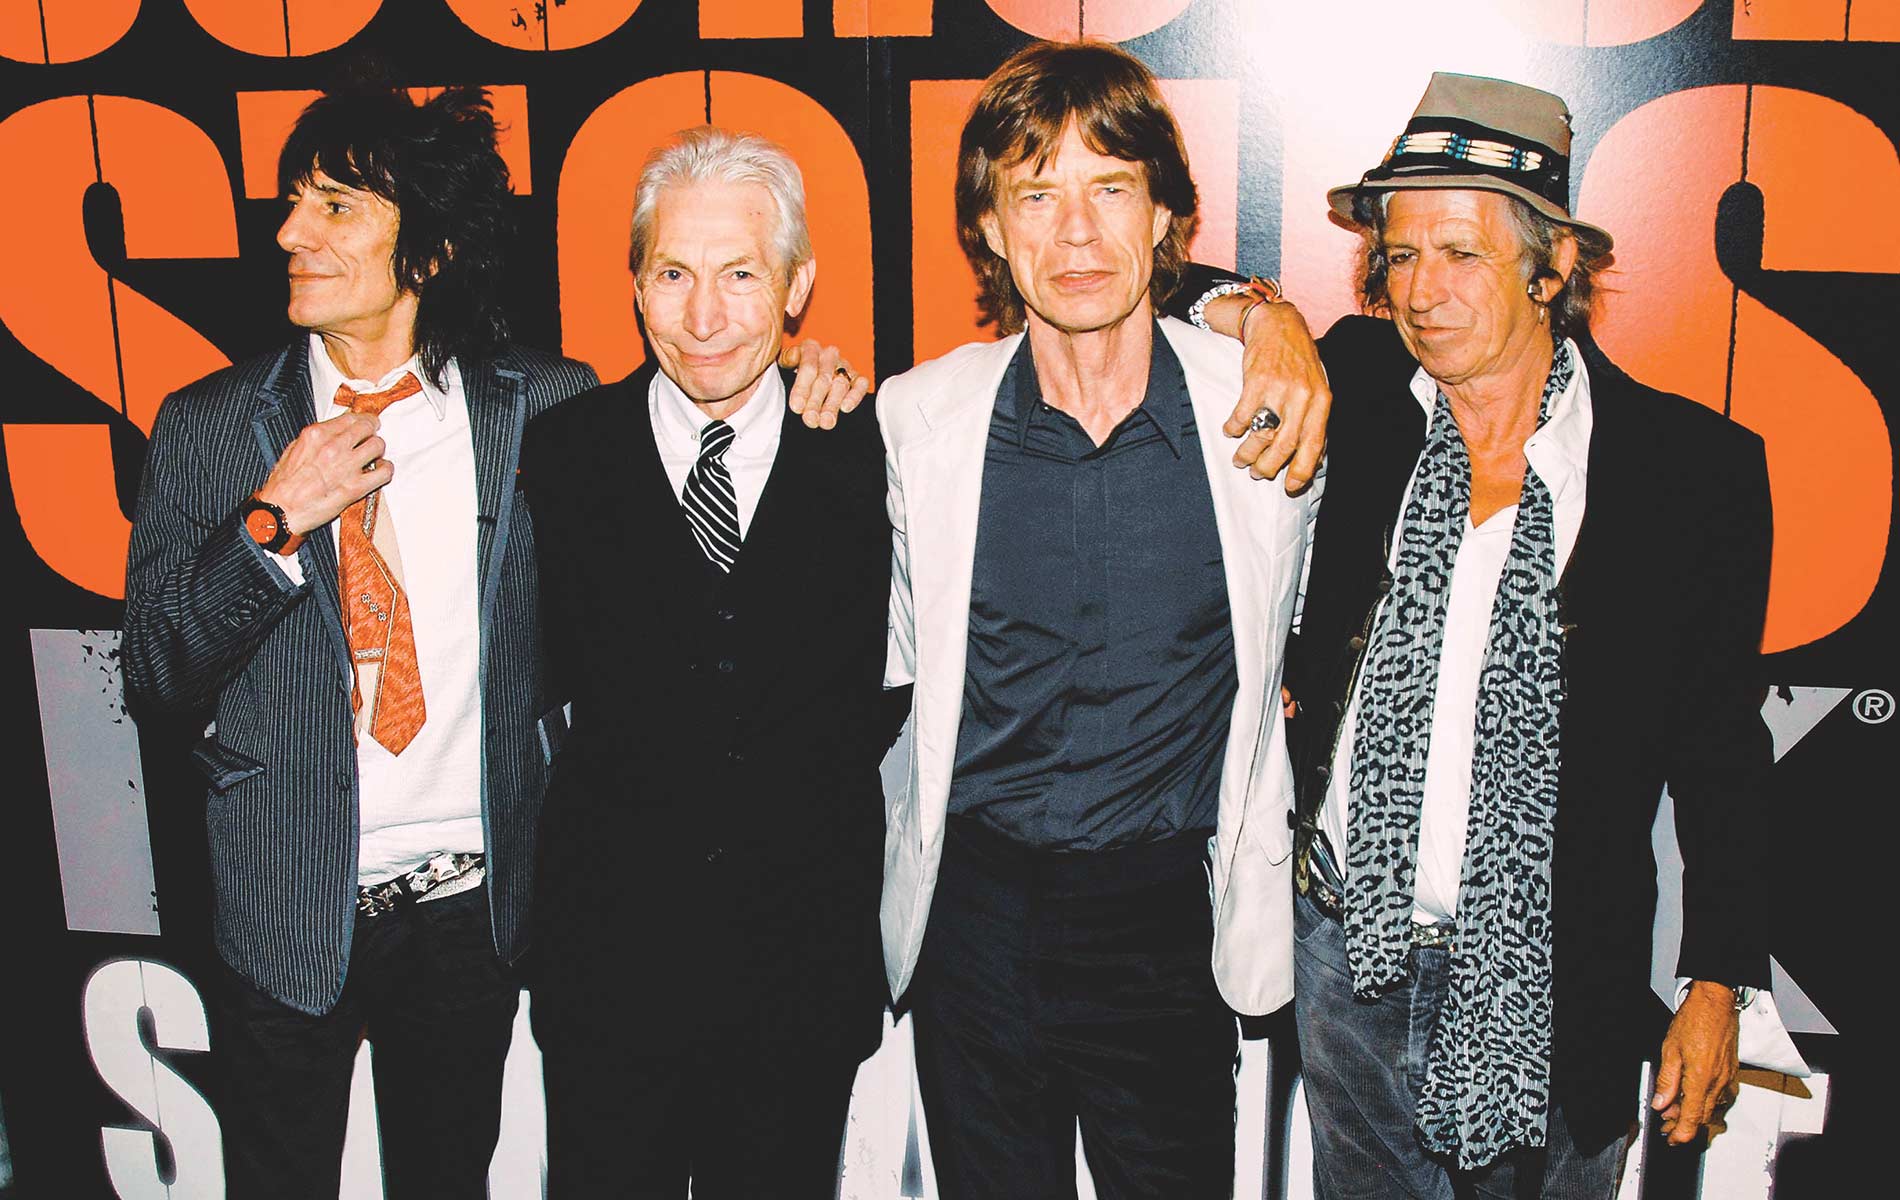 The Rolling Stones’ Ronnie Wood, Charlie Watts, Mick Jagger, and Keith Richards at Clearview's Ziegfeld Theater in New York in March of 2008